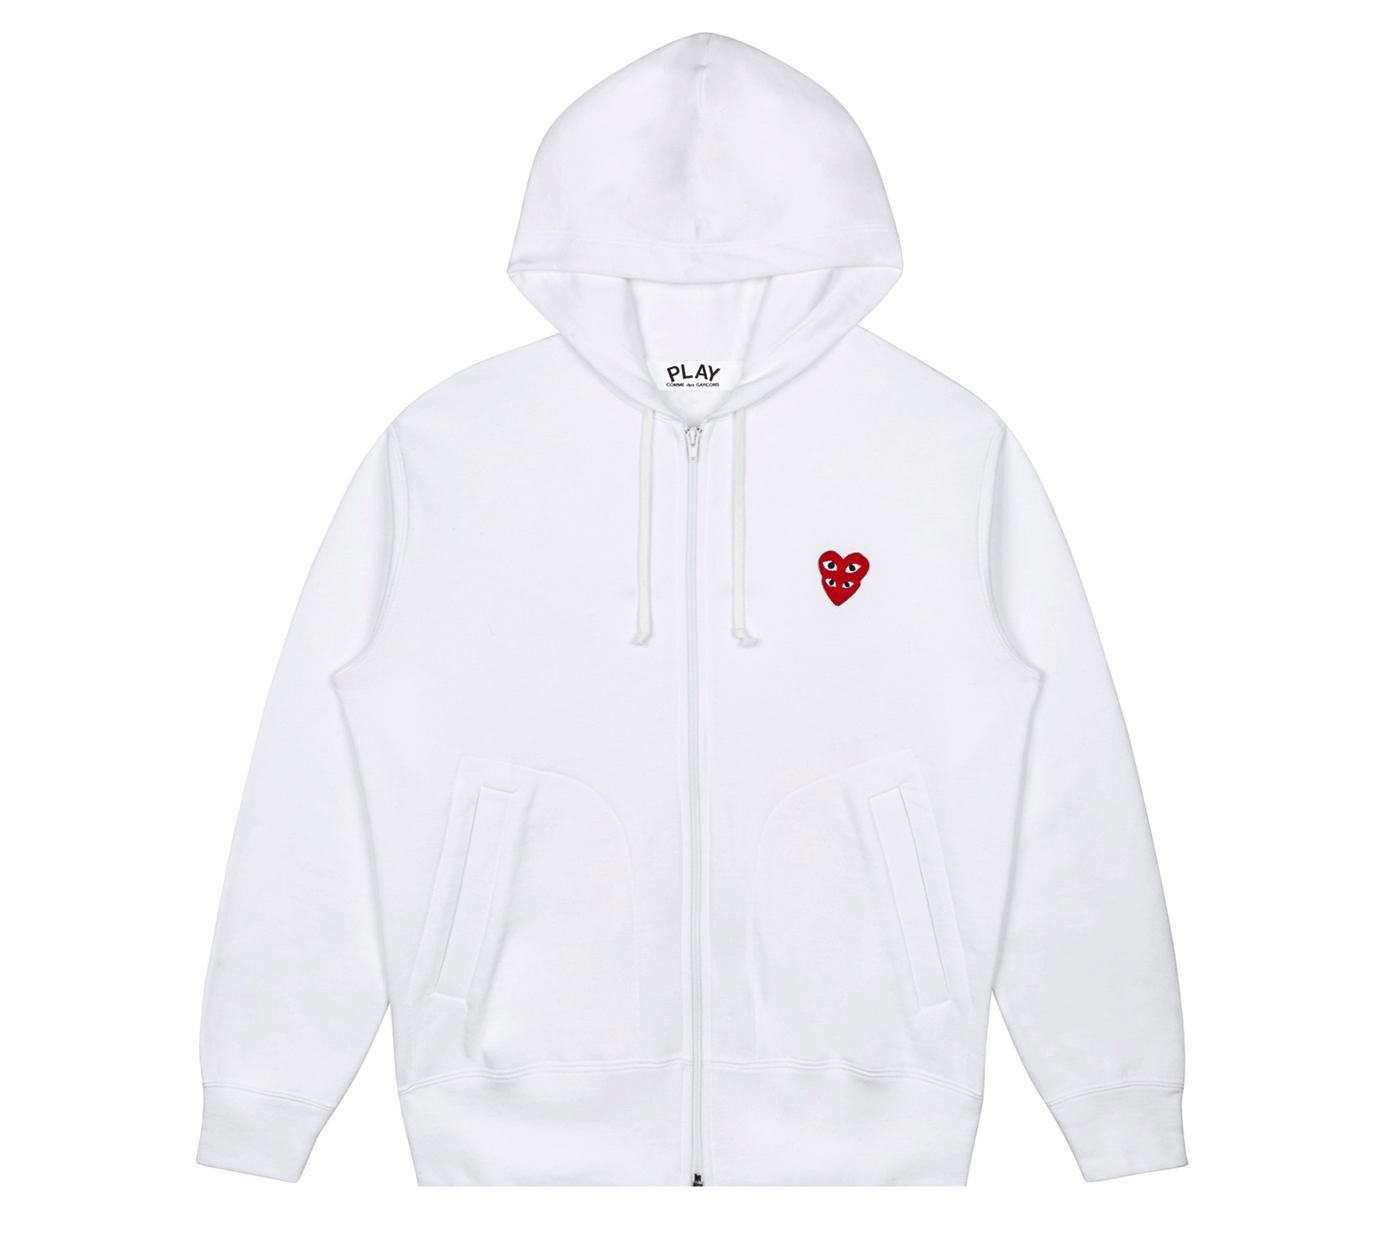     Comme-des-Garcons-Play-Double-Red-Emblem-Zip-Up-Hoodie-Men-White-1